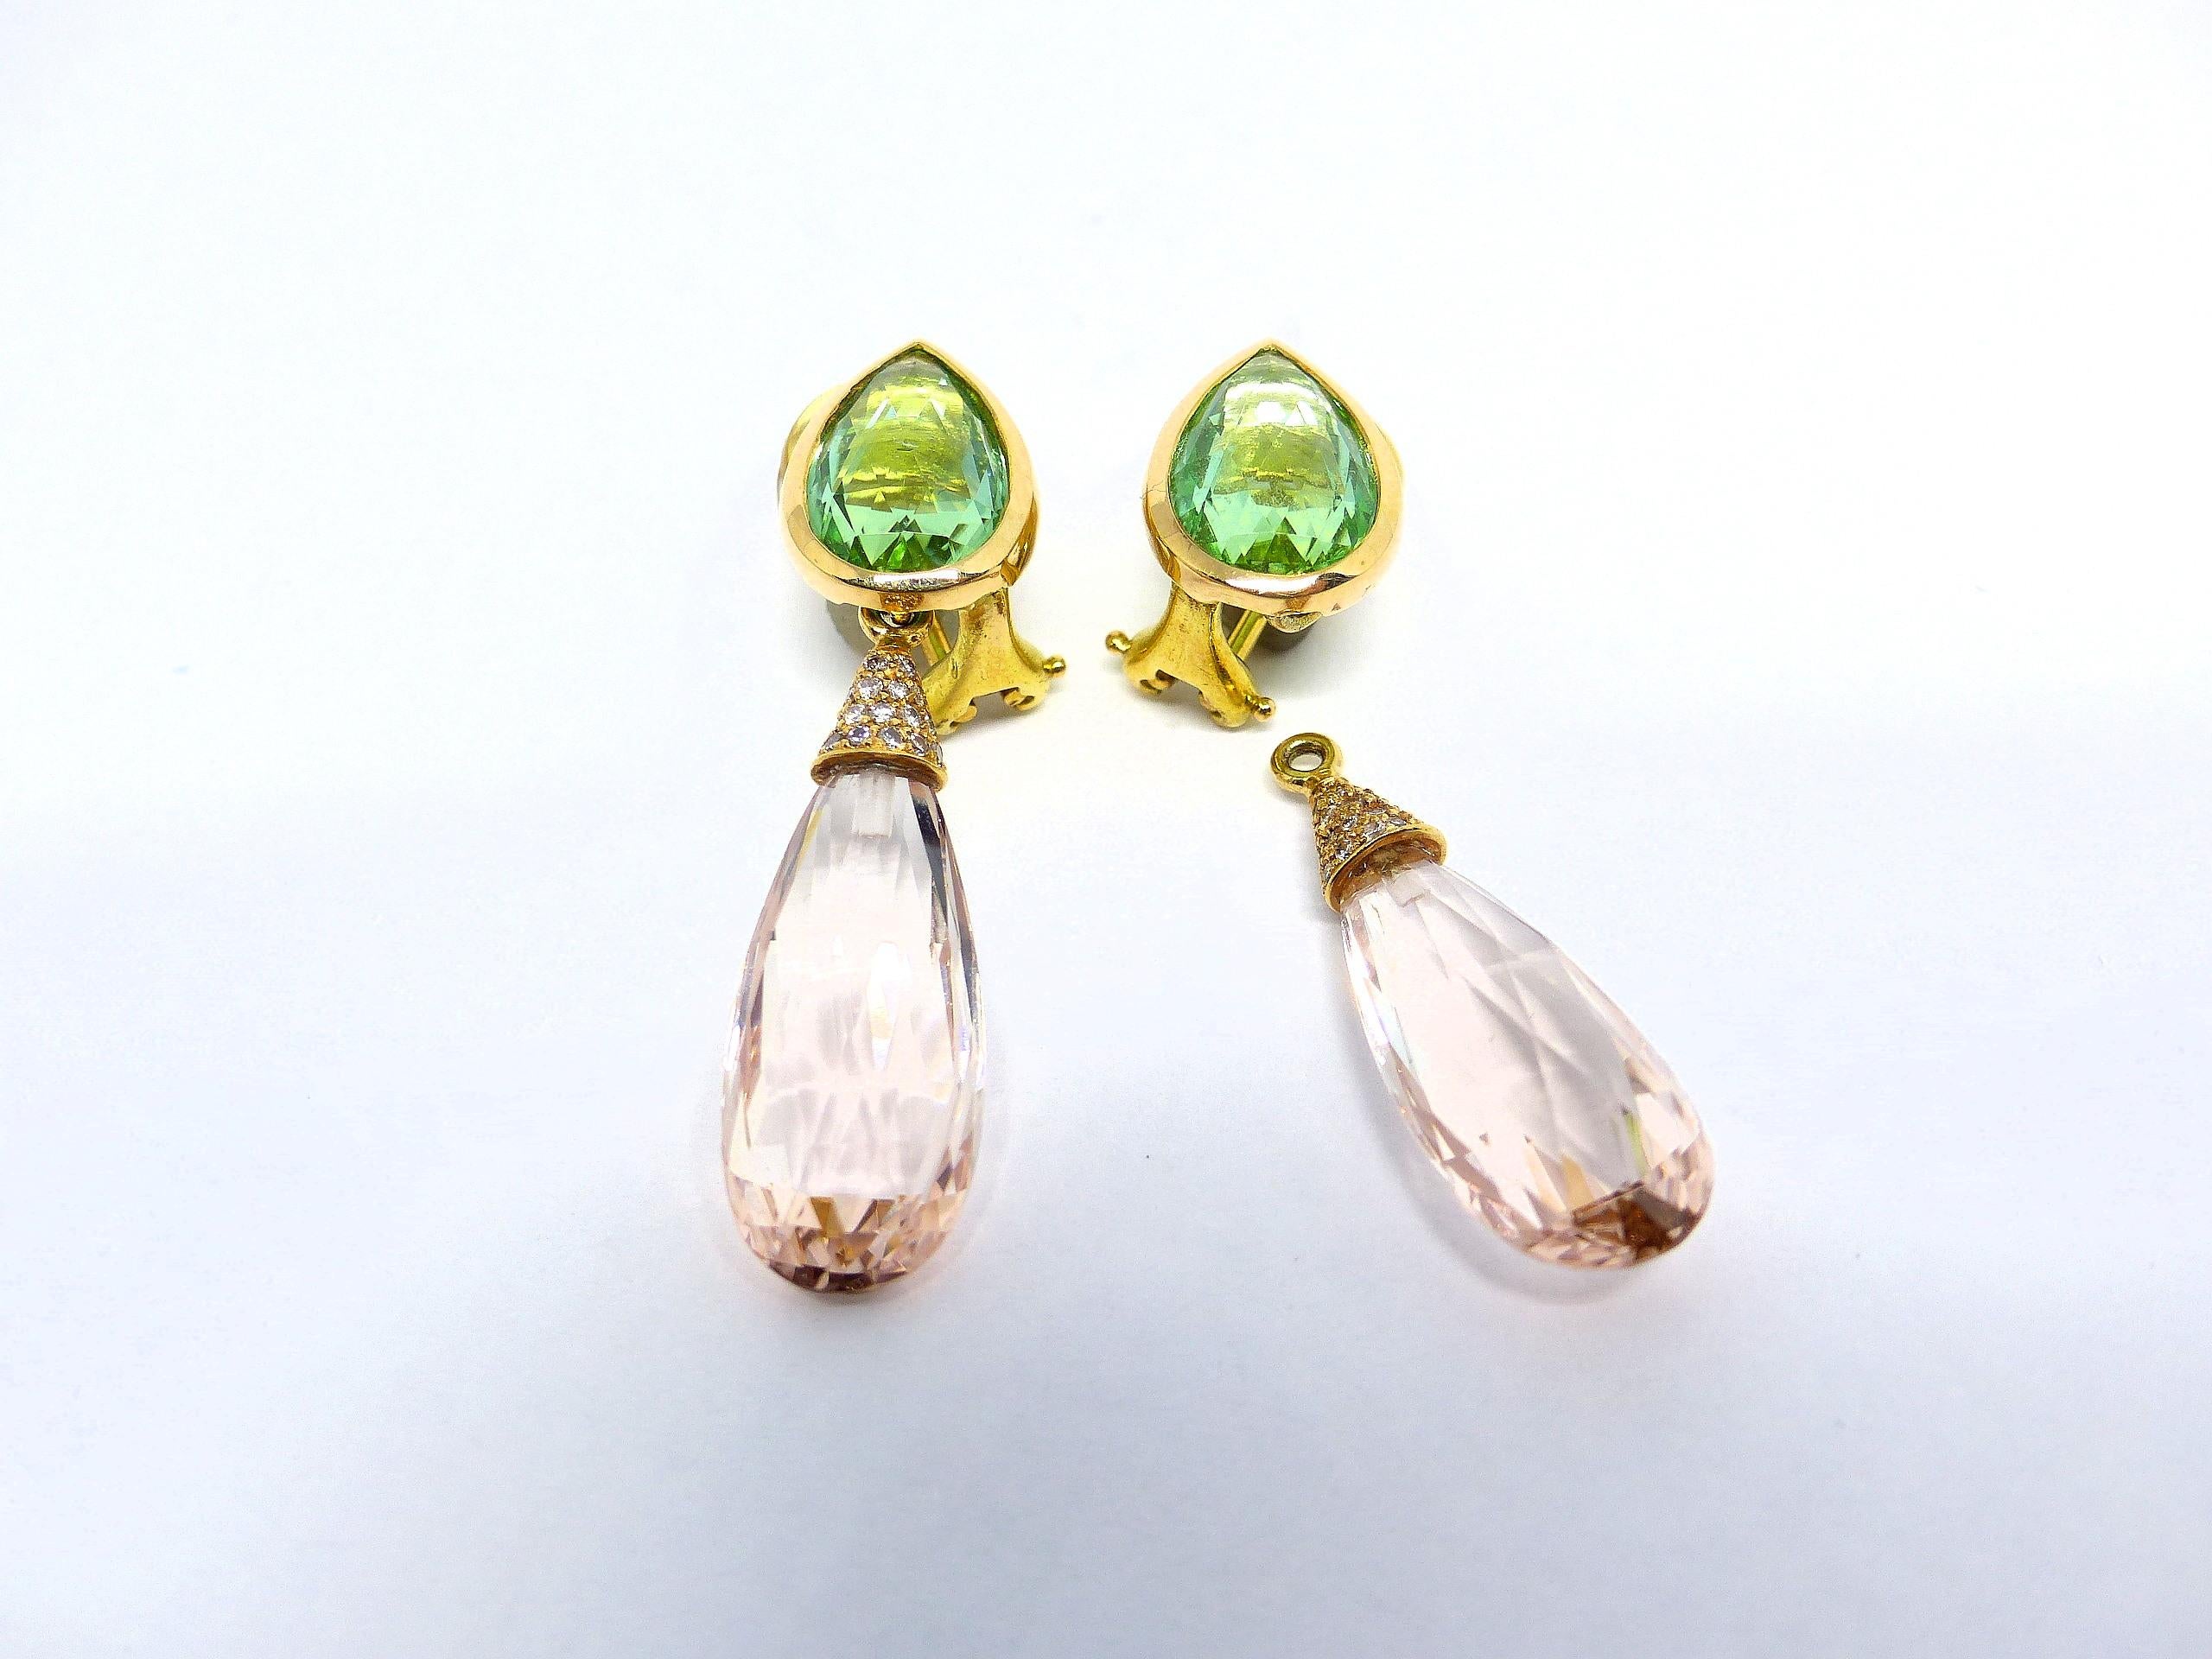 Pear Cut Earring in Rose Gold with 2 Morganites Briolets and 2 Tourmalines and Diamonds. For Sale